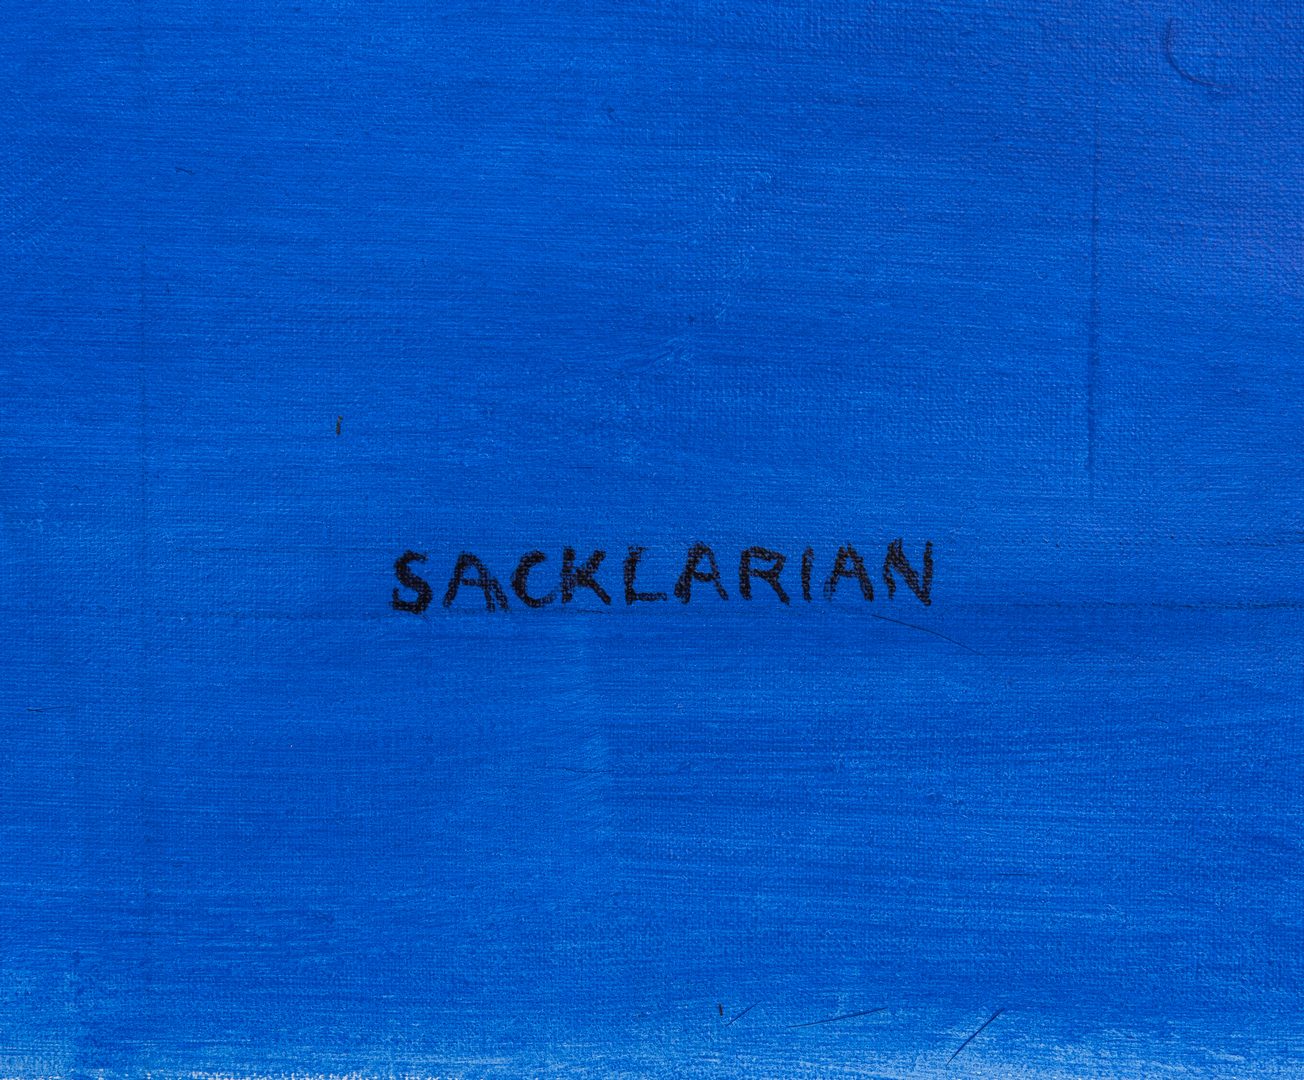 Lot 539: Untitled Abstract on Canvas by Stephen Sacklarian